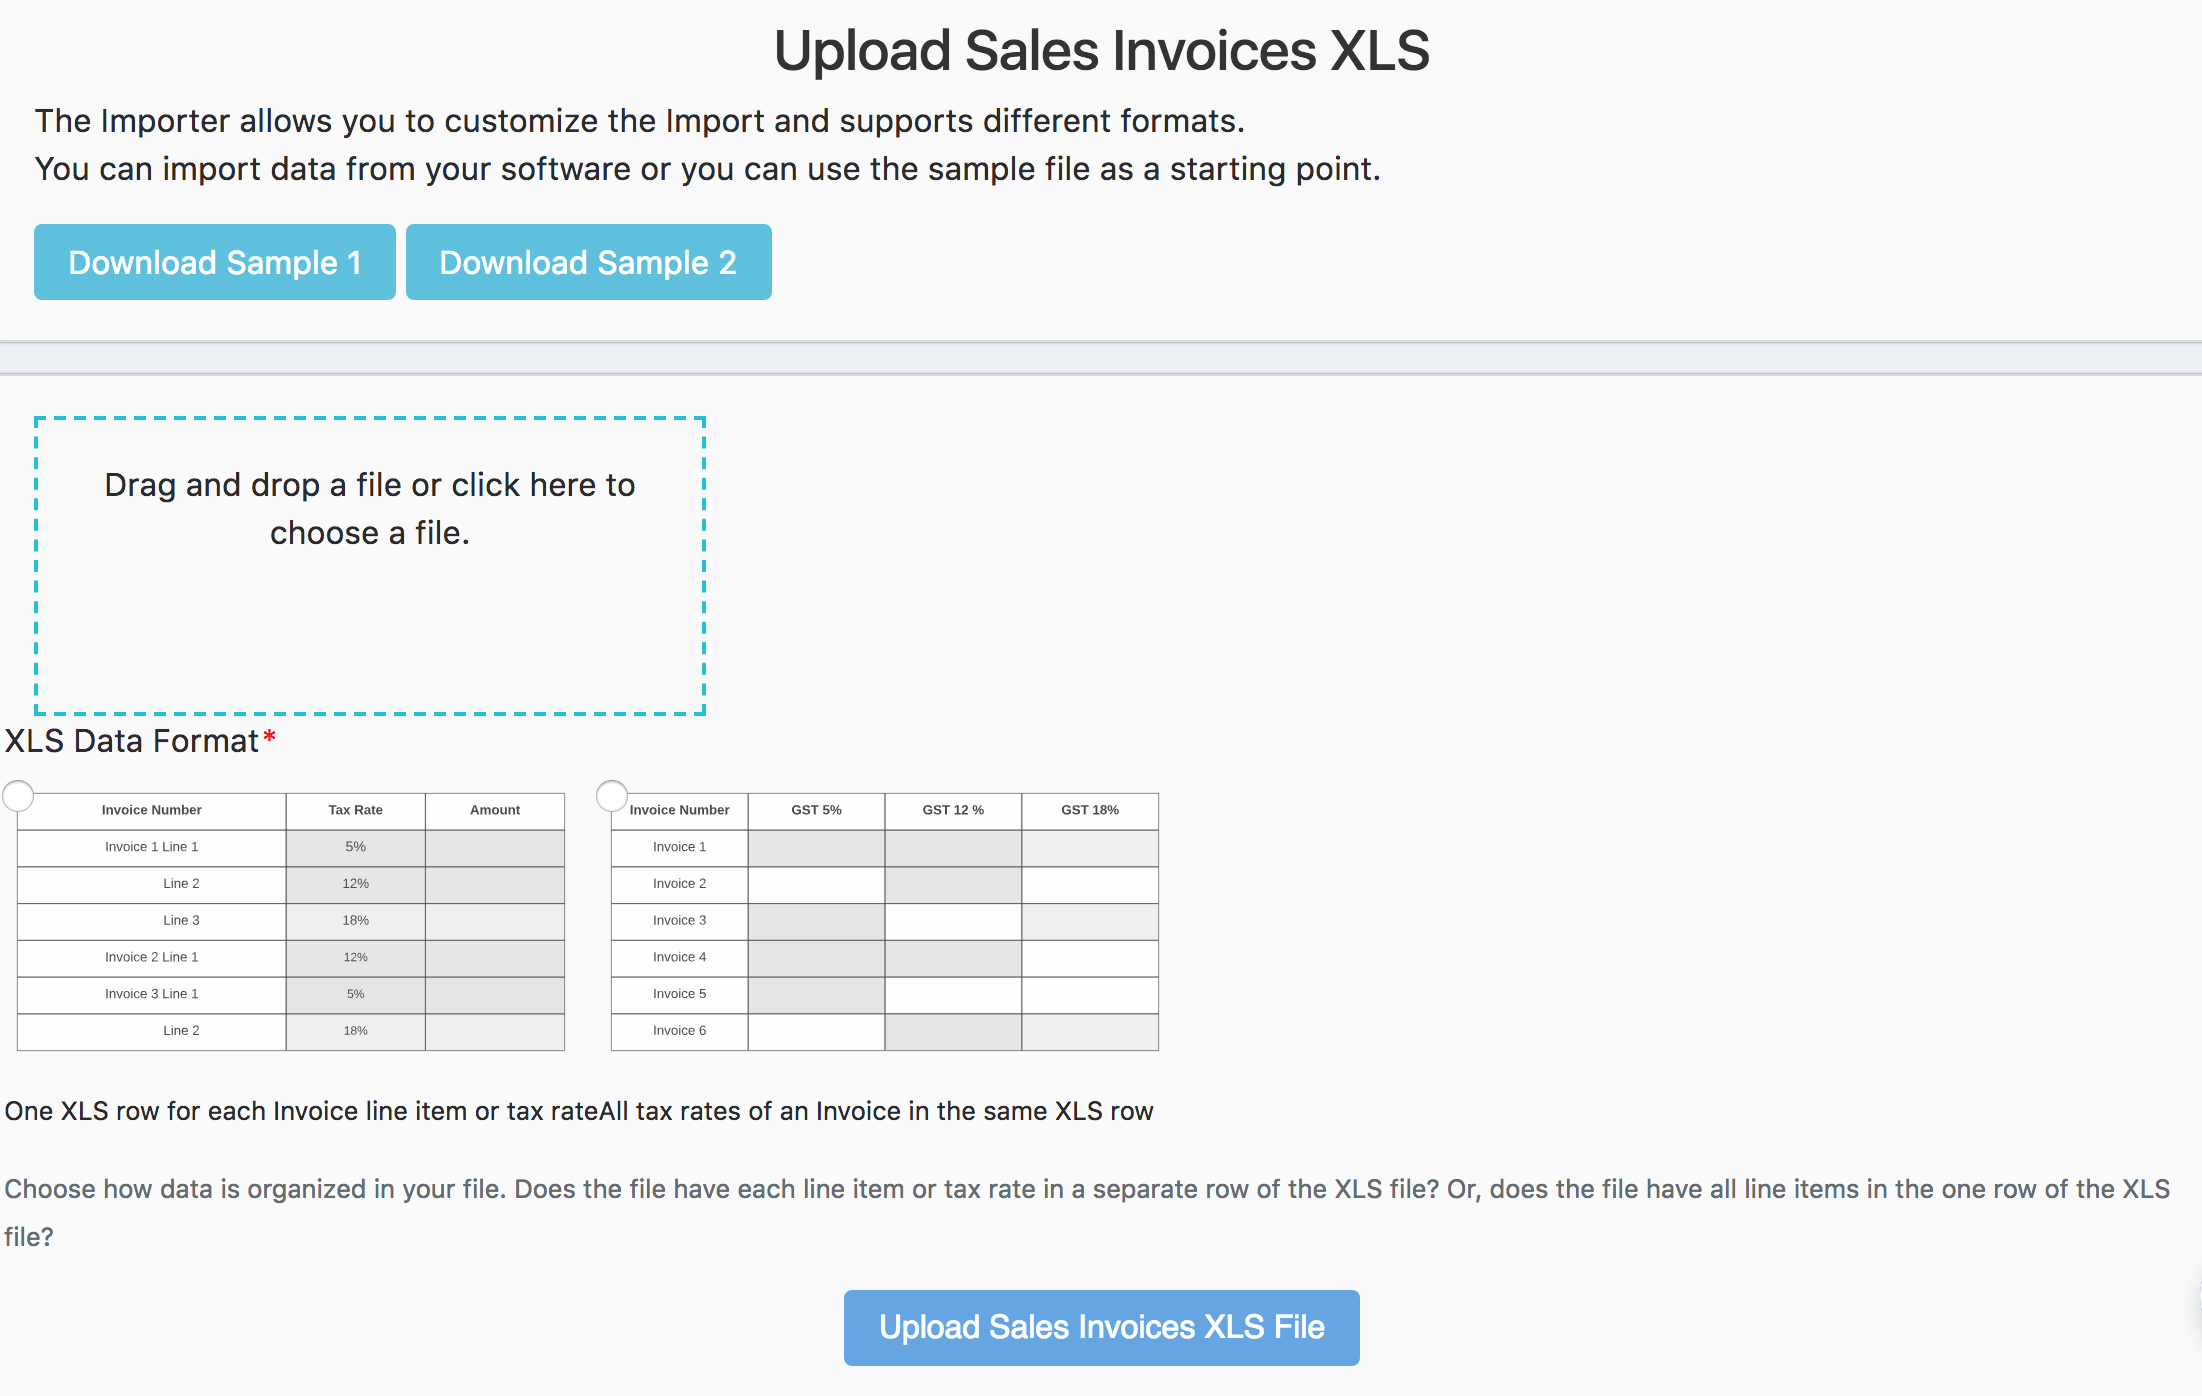 Upload Sales Invoice Page